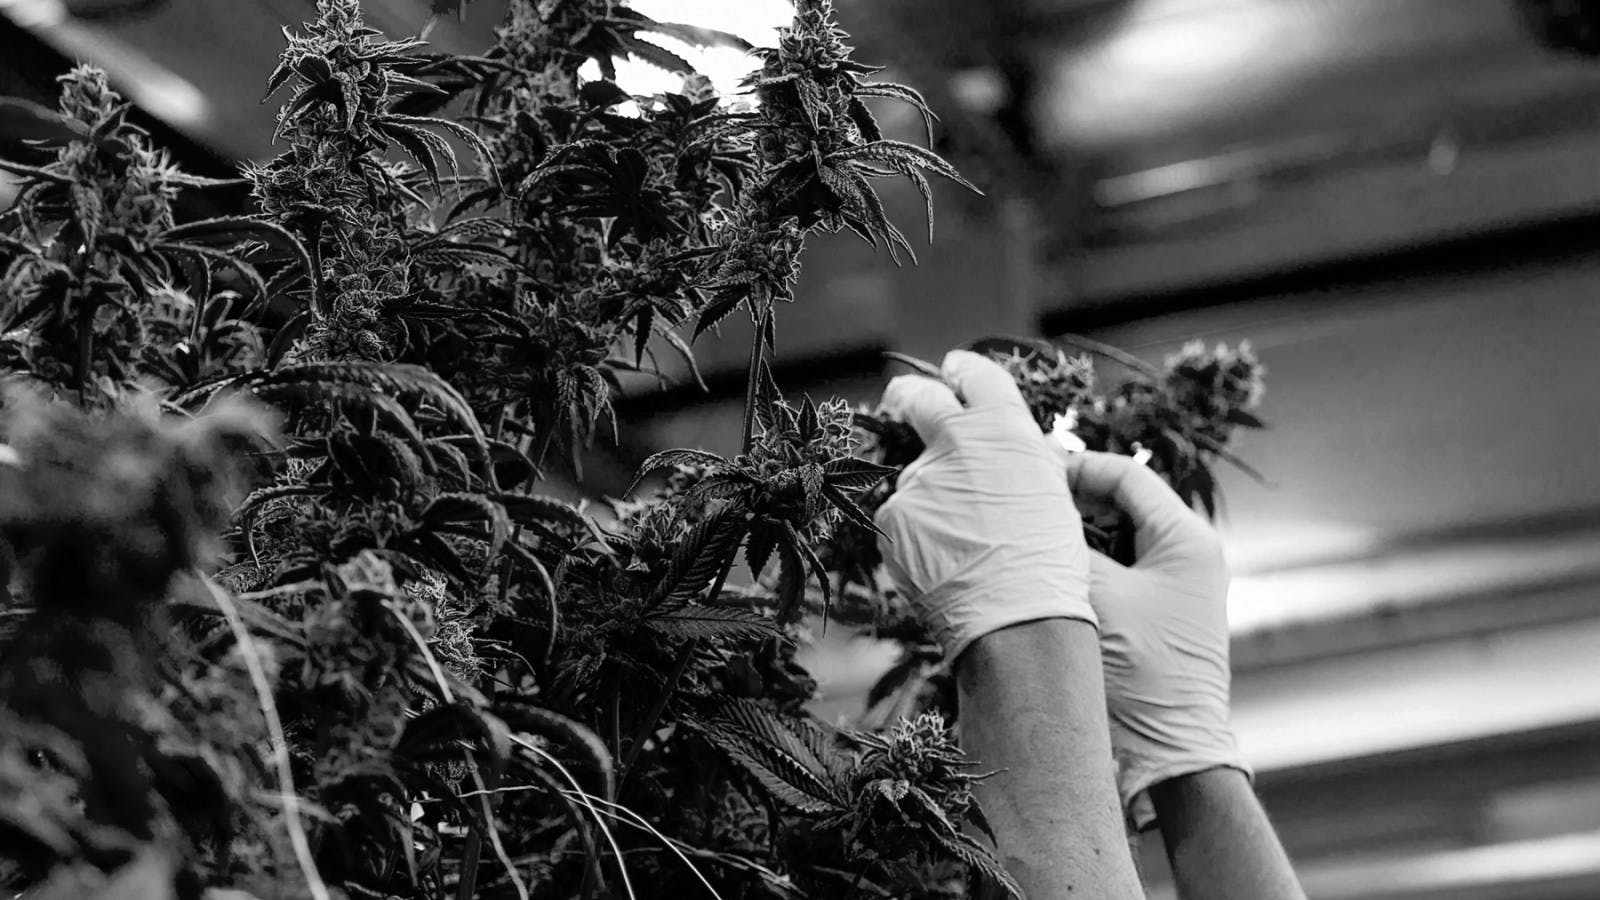 How Mainstream Adoption Could Lead to a Cannabis Brand Evolution